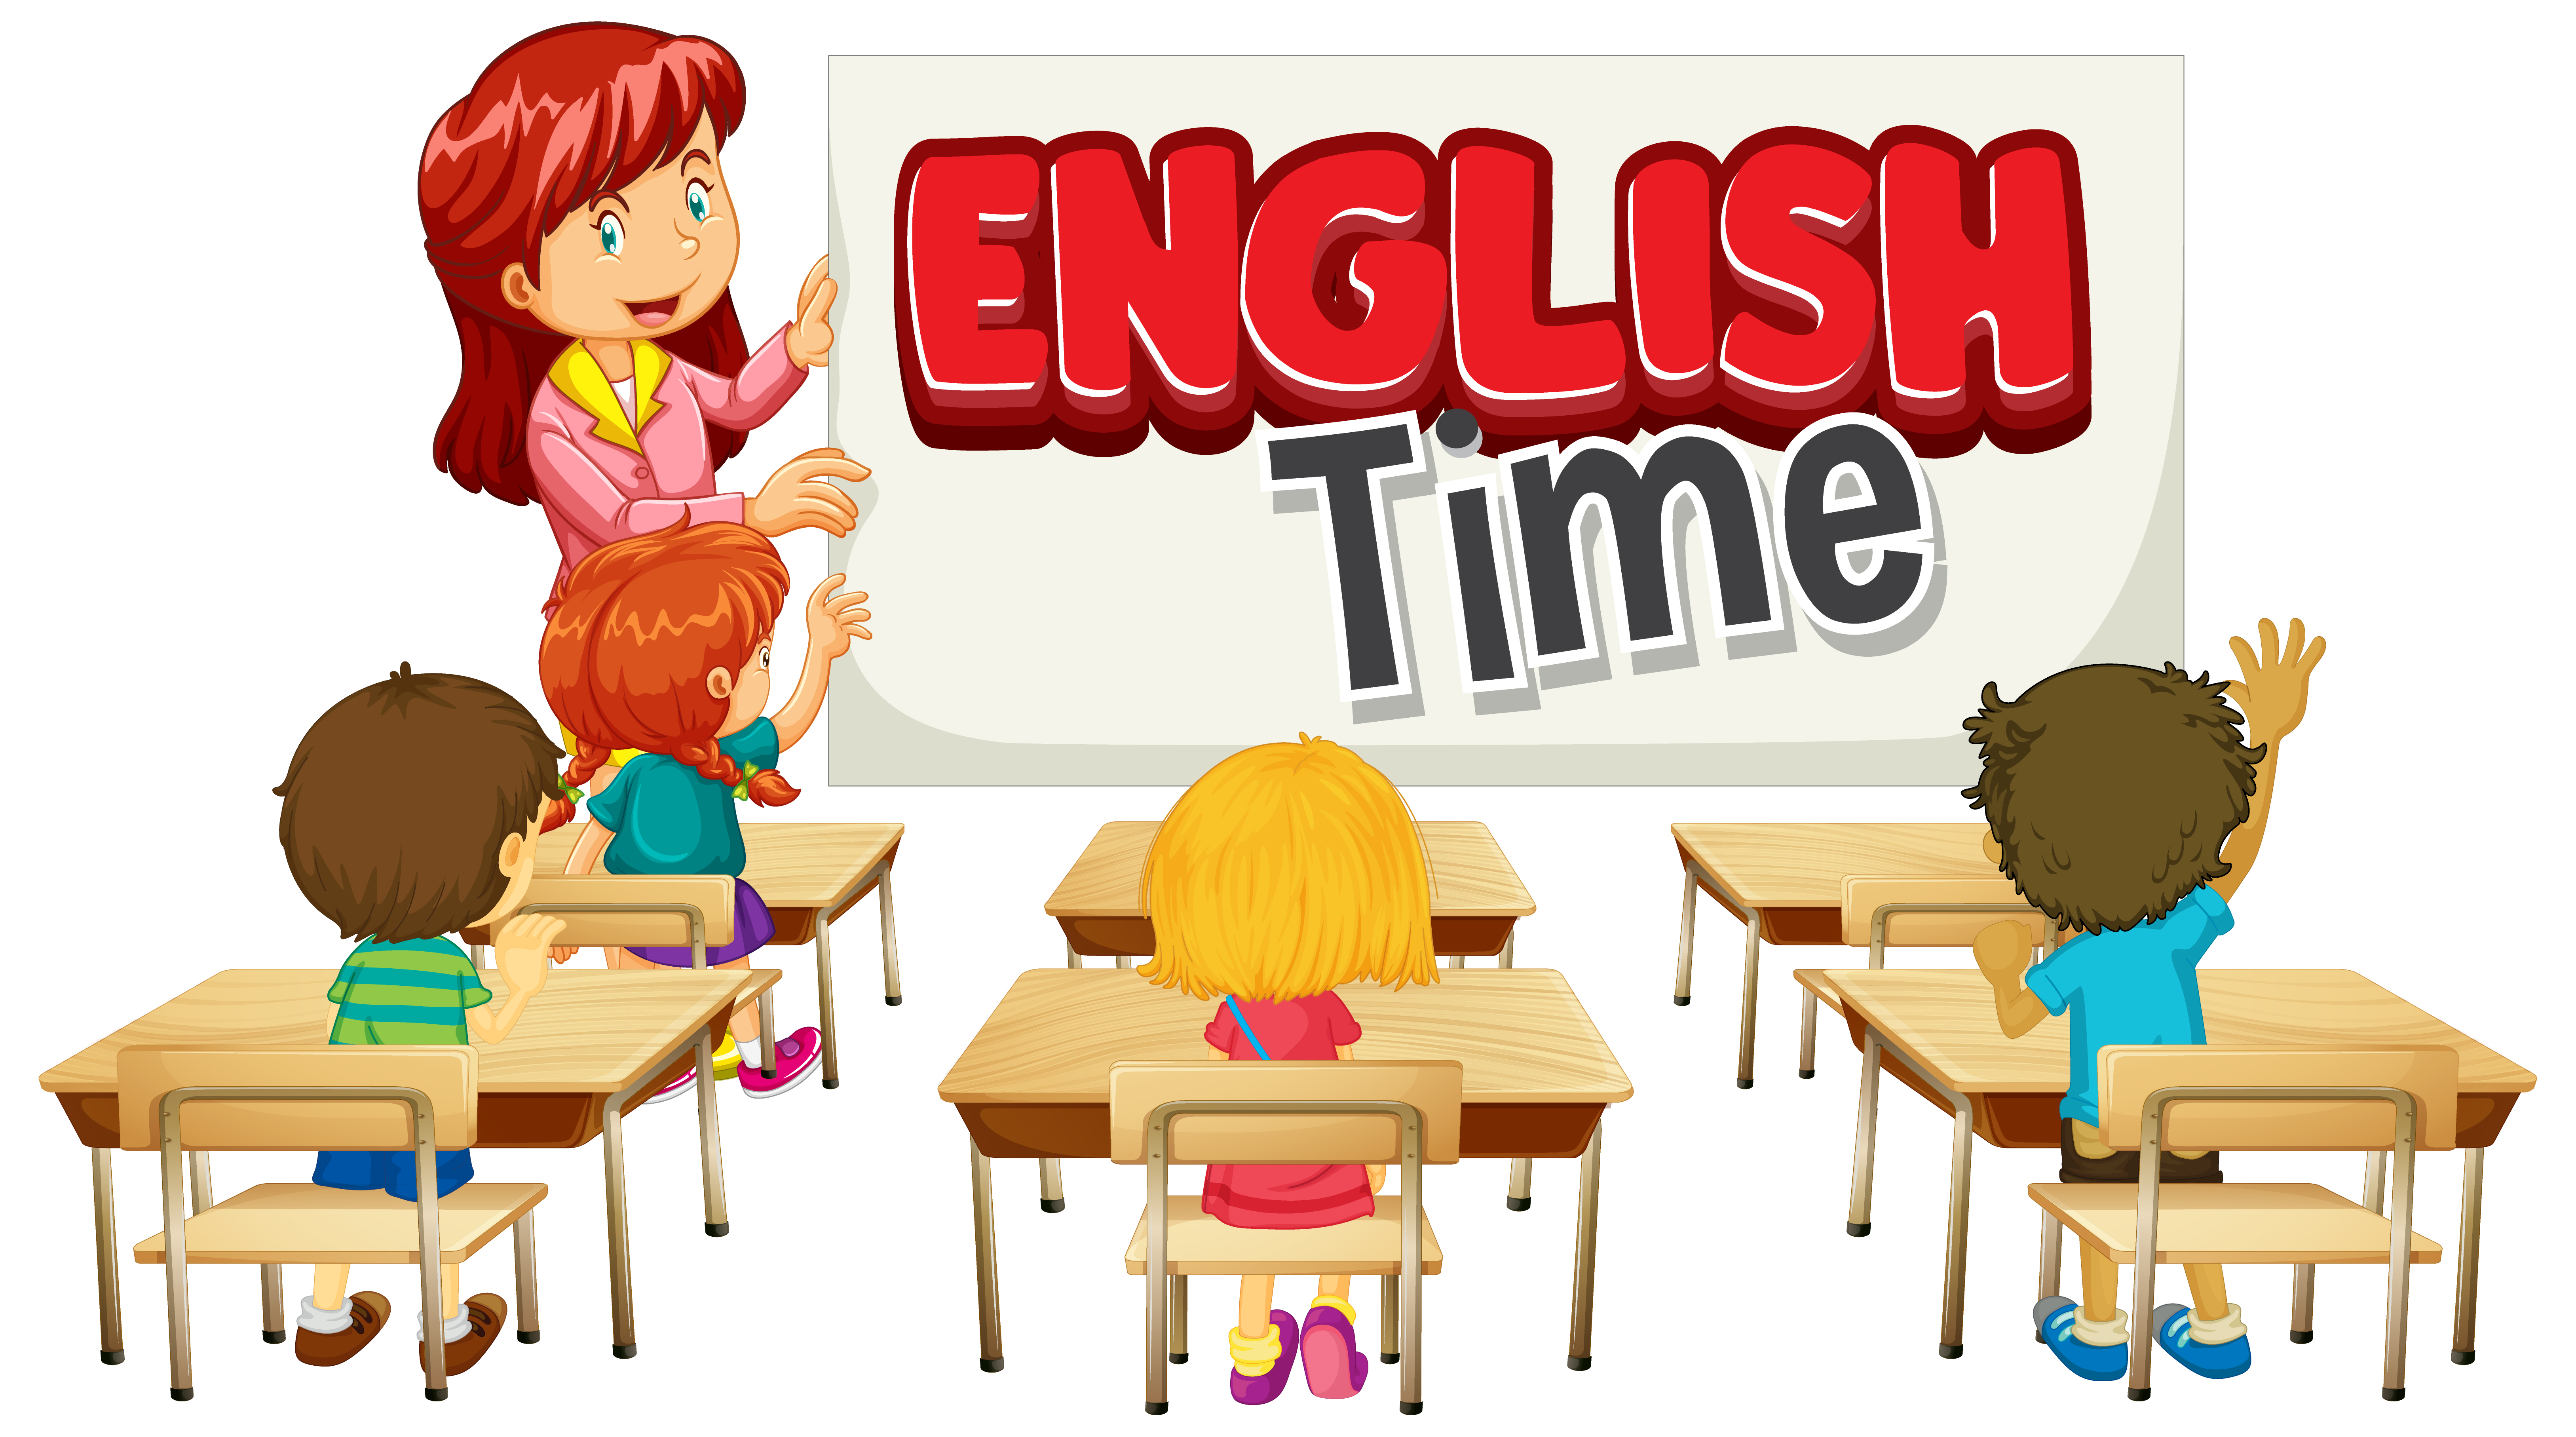 Font design for word english time with teacher and students in class illustration